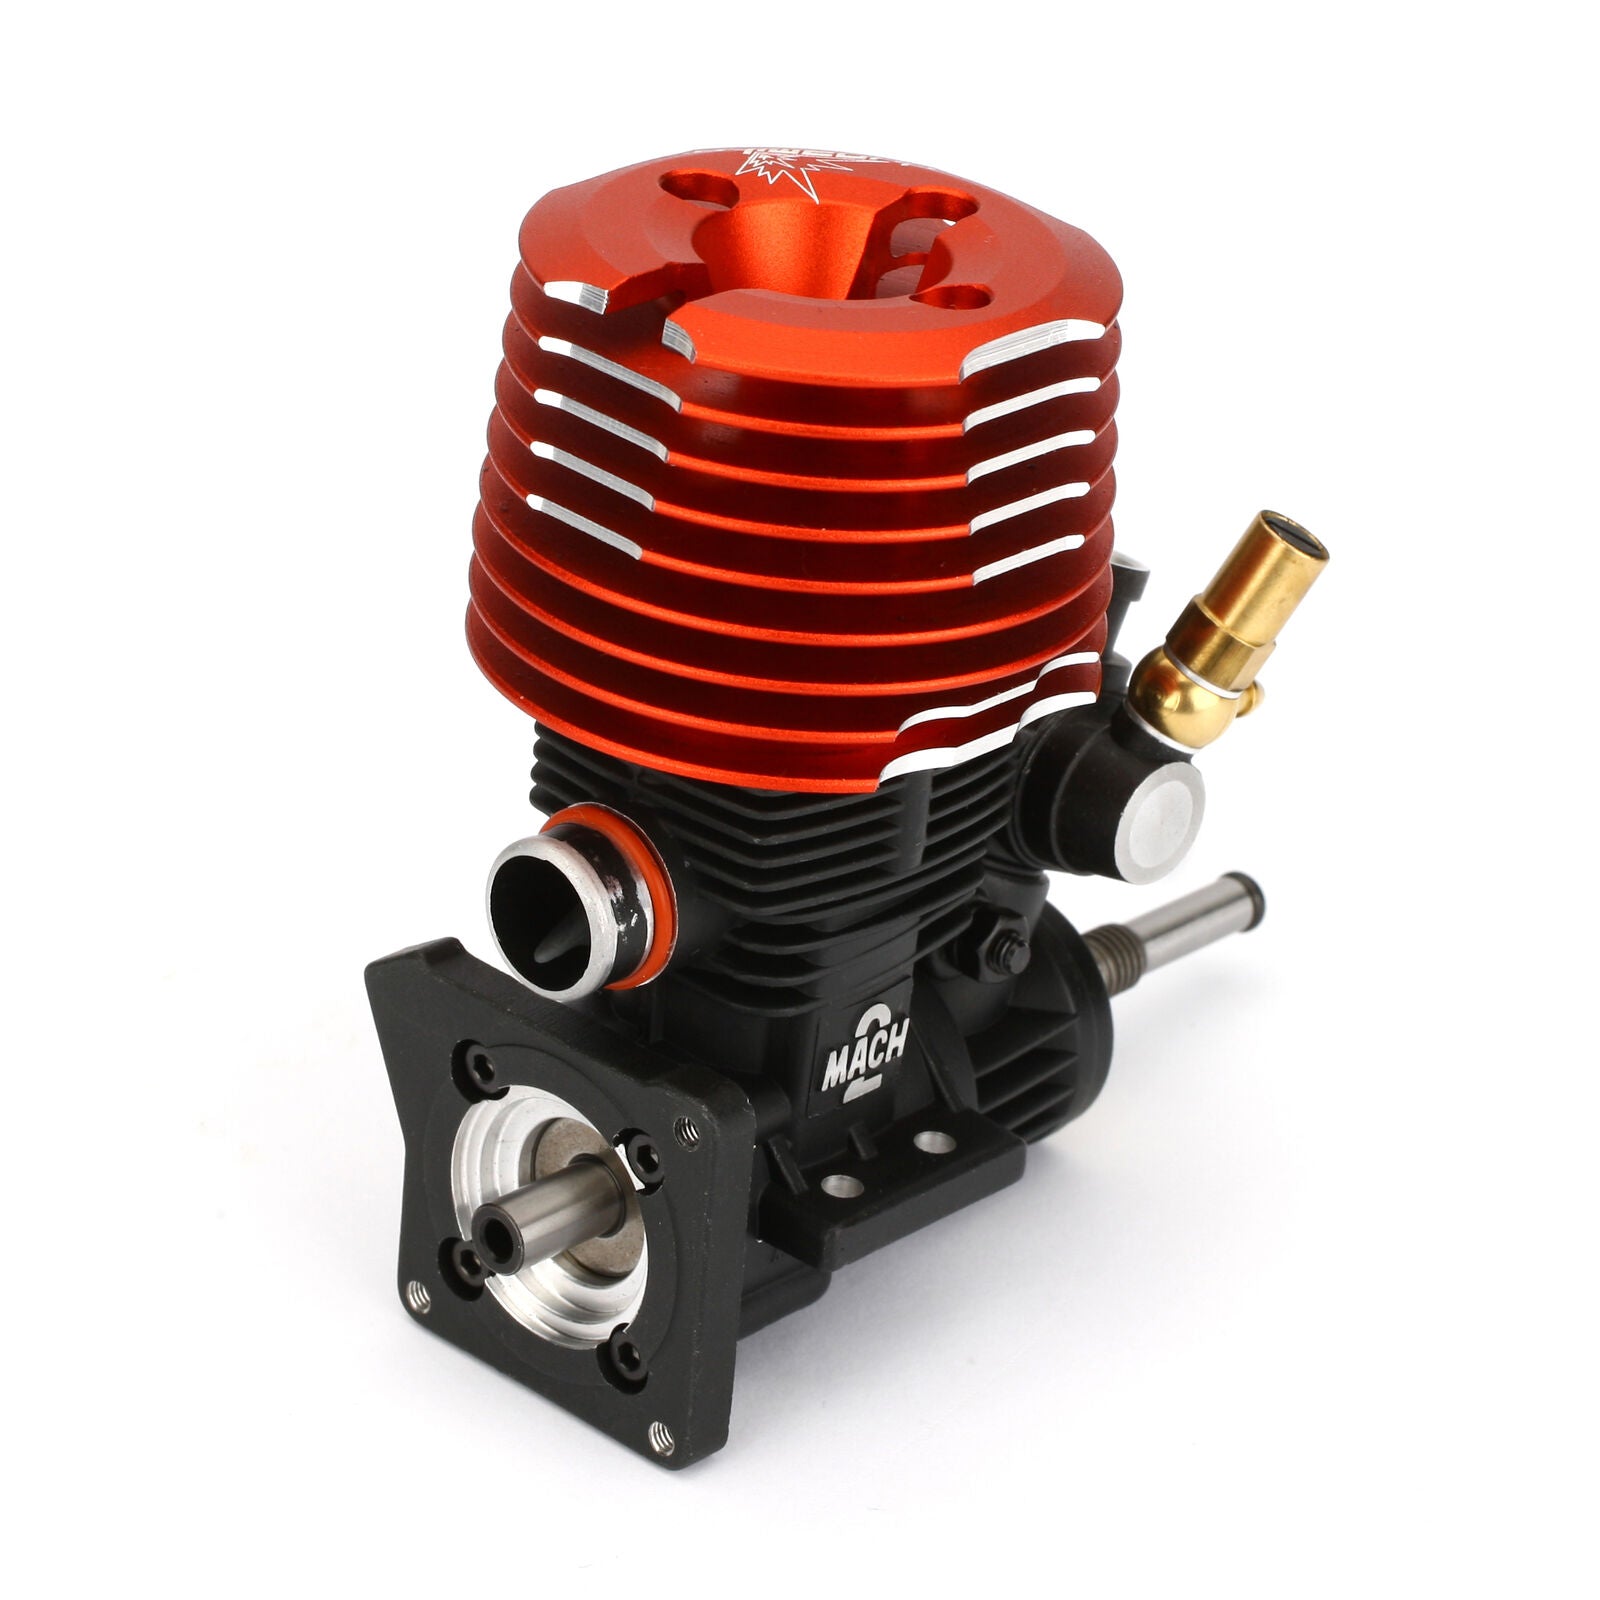 DYNAMITE DYN0700 .19T Mach 2 Replacement Engine for Traxxas Vehicles